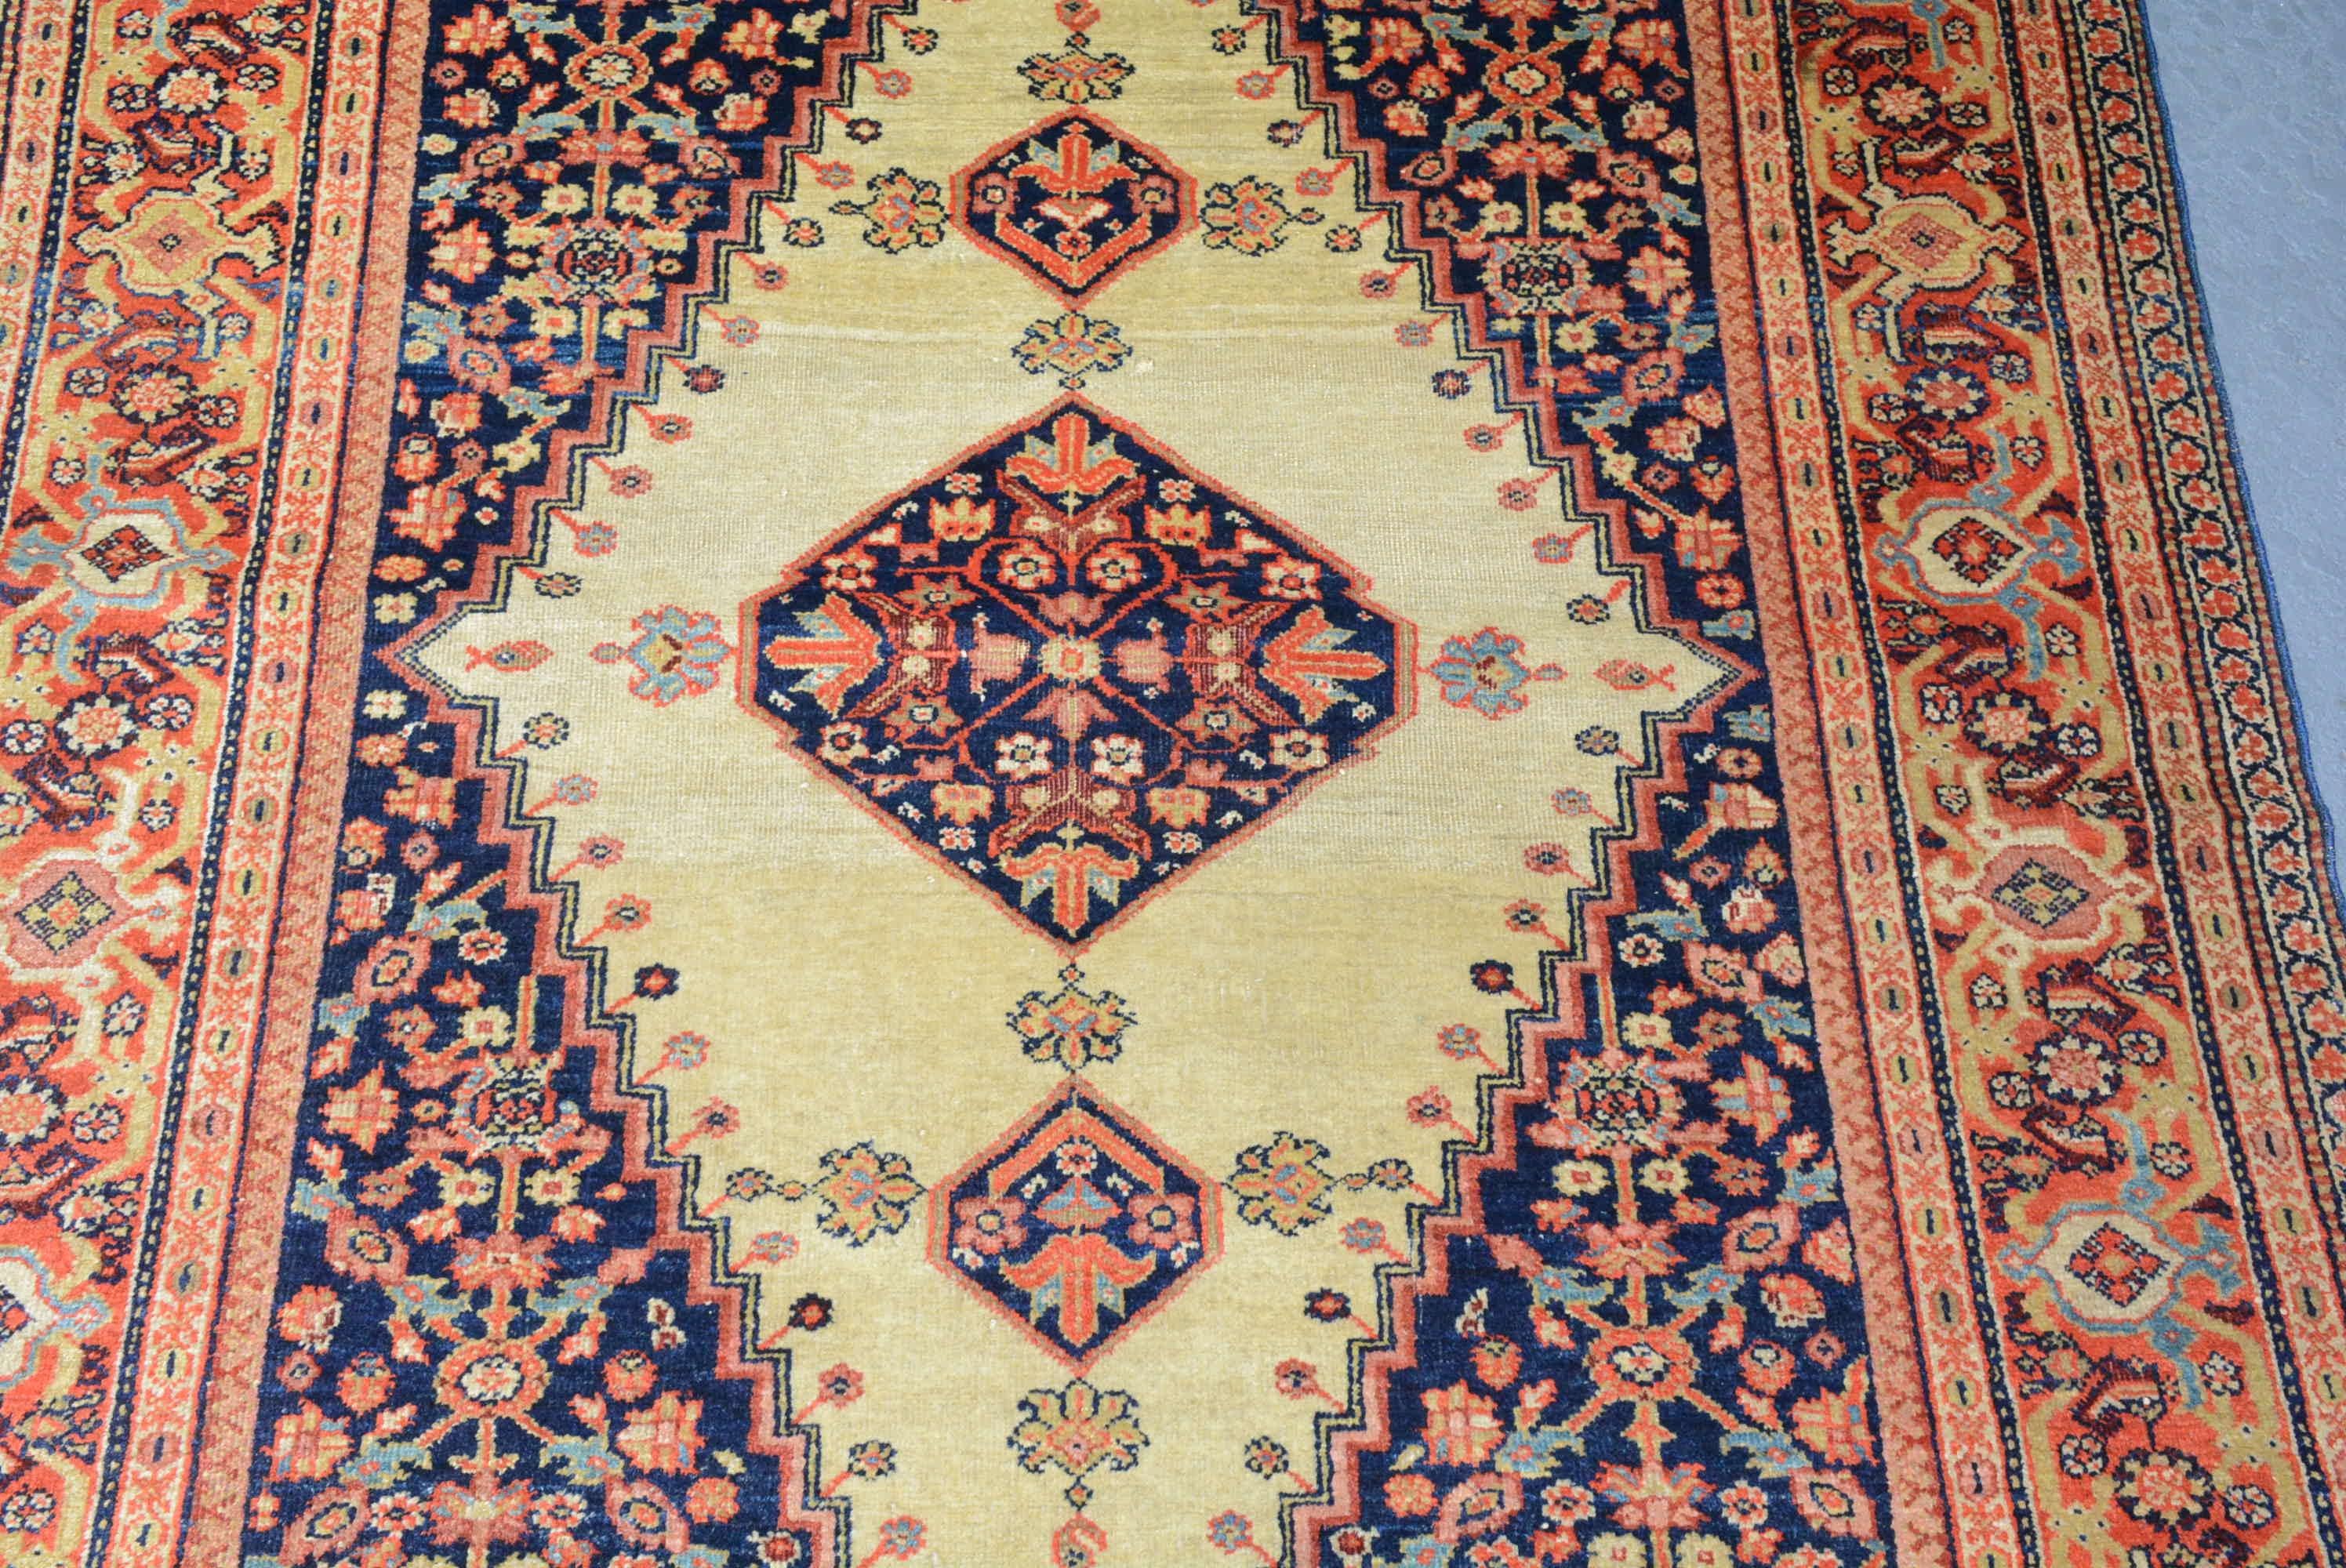 Rugs and carpets from the Fereghan district in northern Persia carefully blend geometric influences from neighboring western tribes with a more refined curvilinear aesthetic as seen in this example.